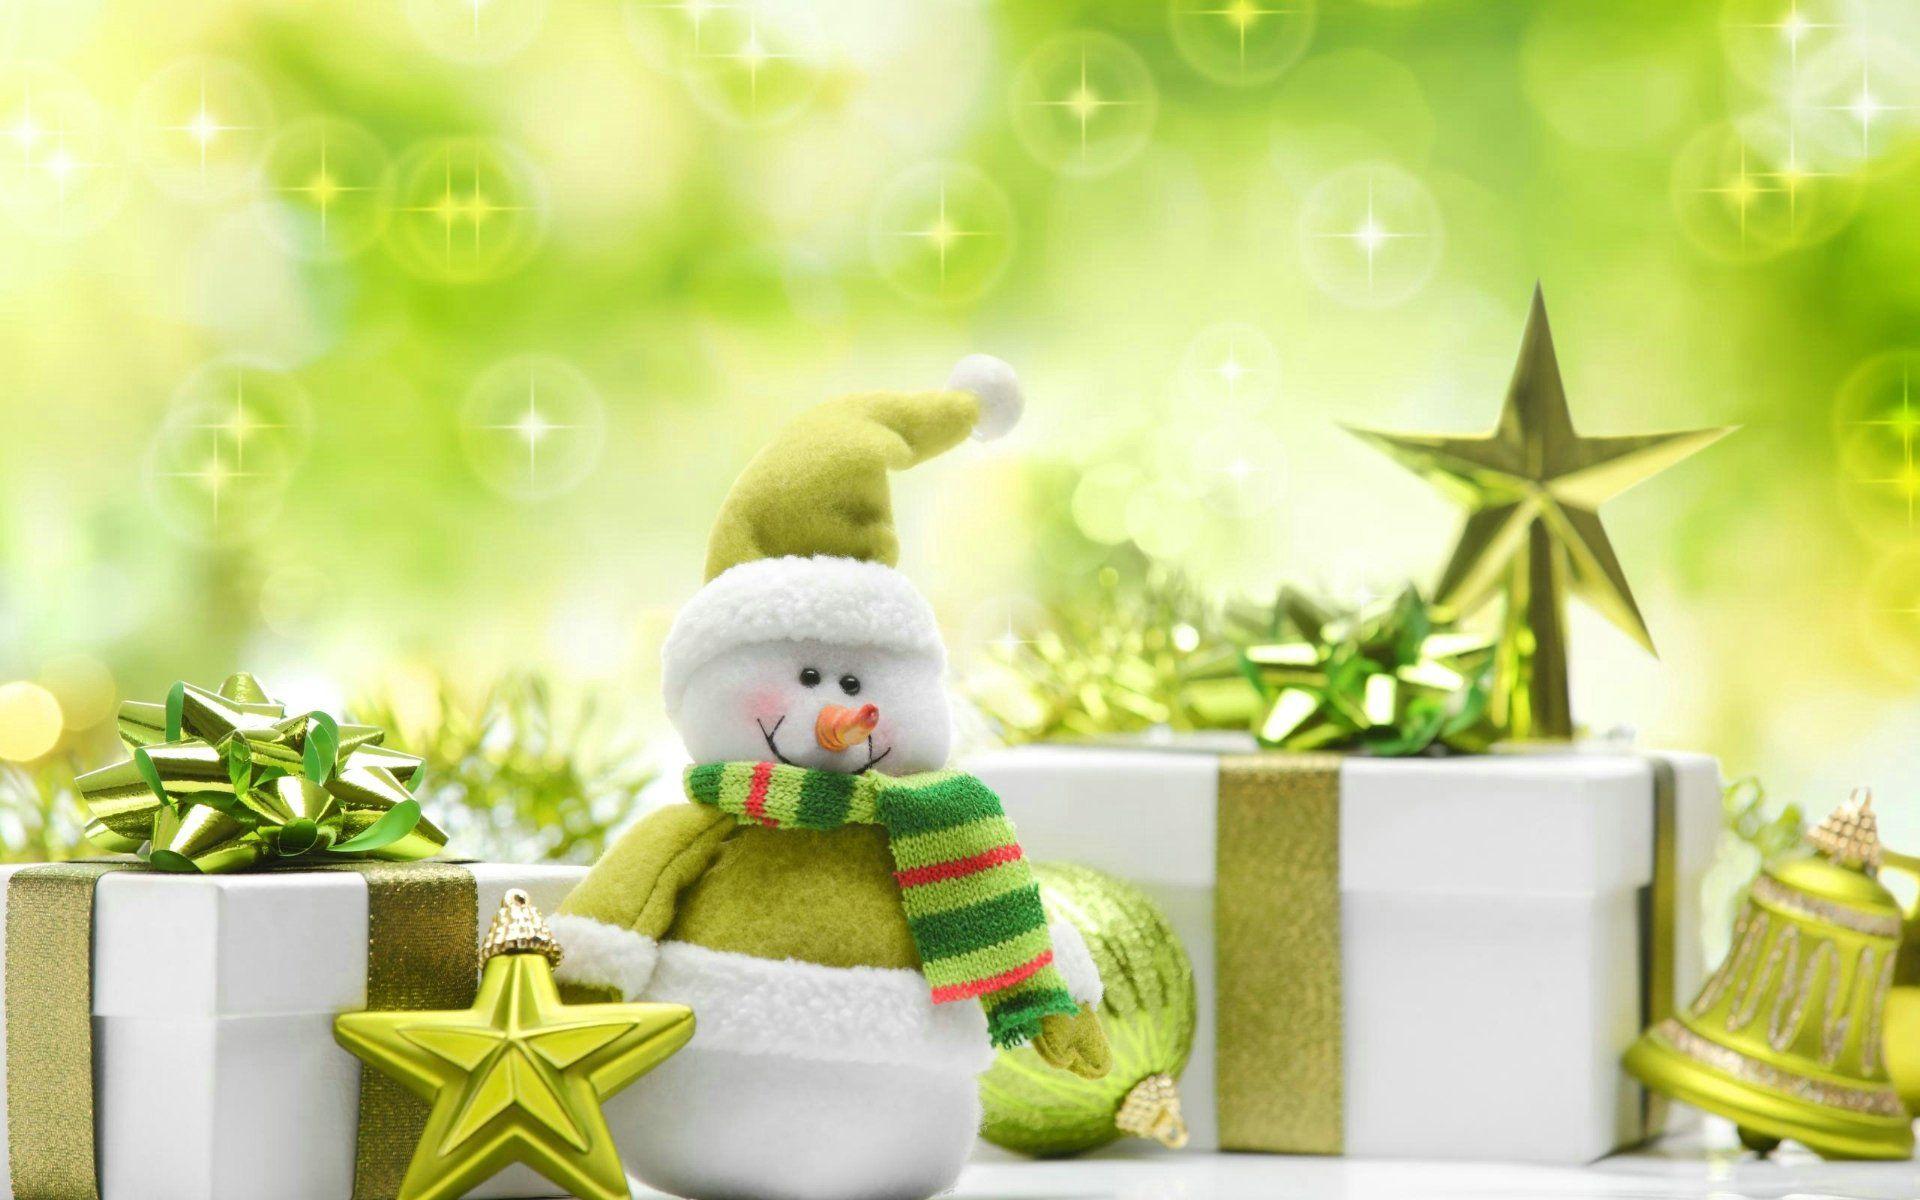 Green Christmas Presents, High Definition, High Quality, Widescreen